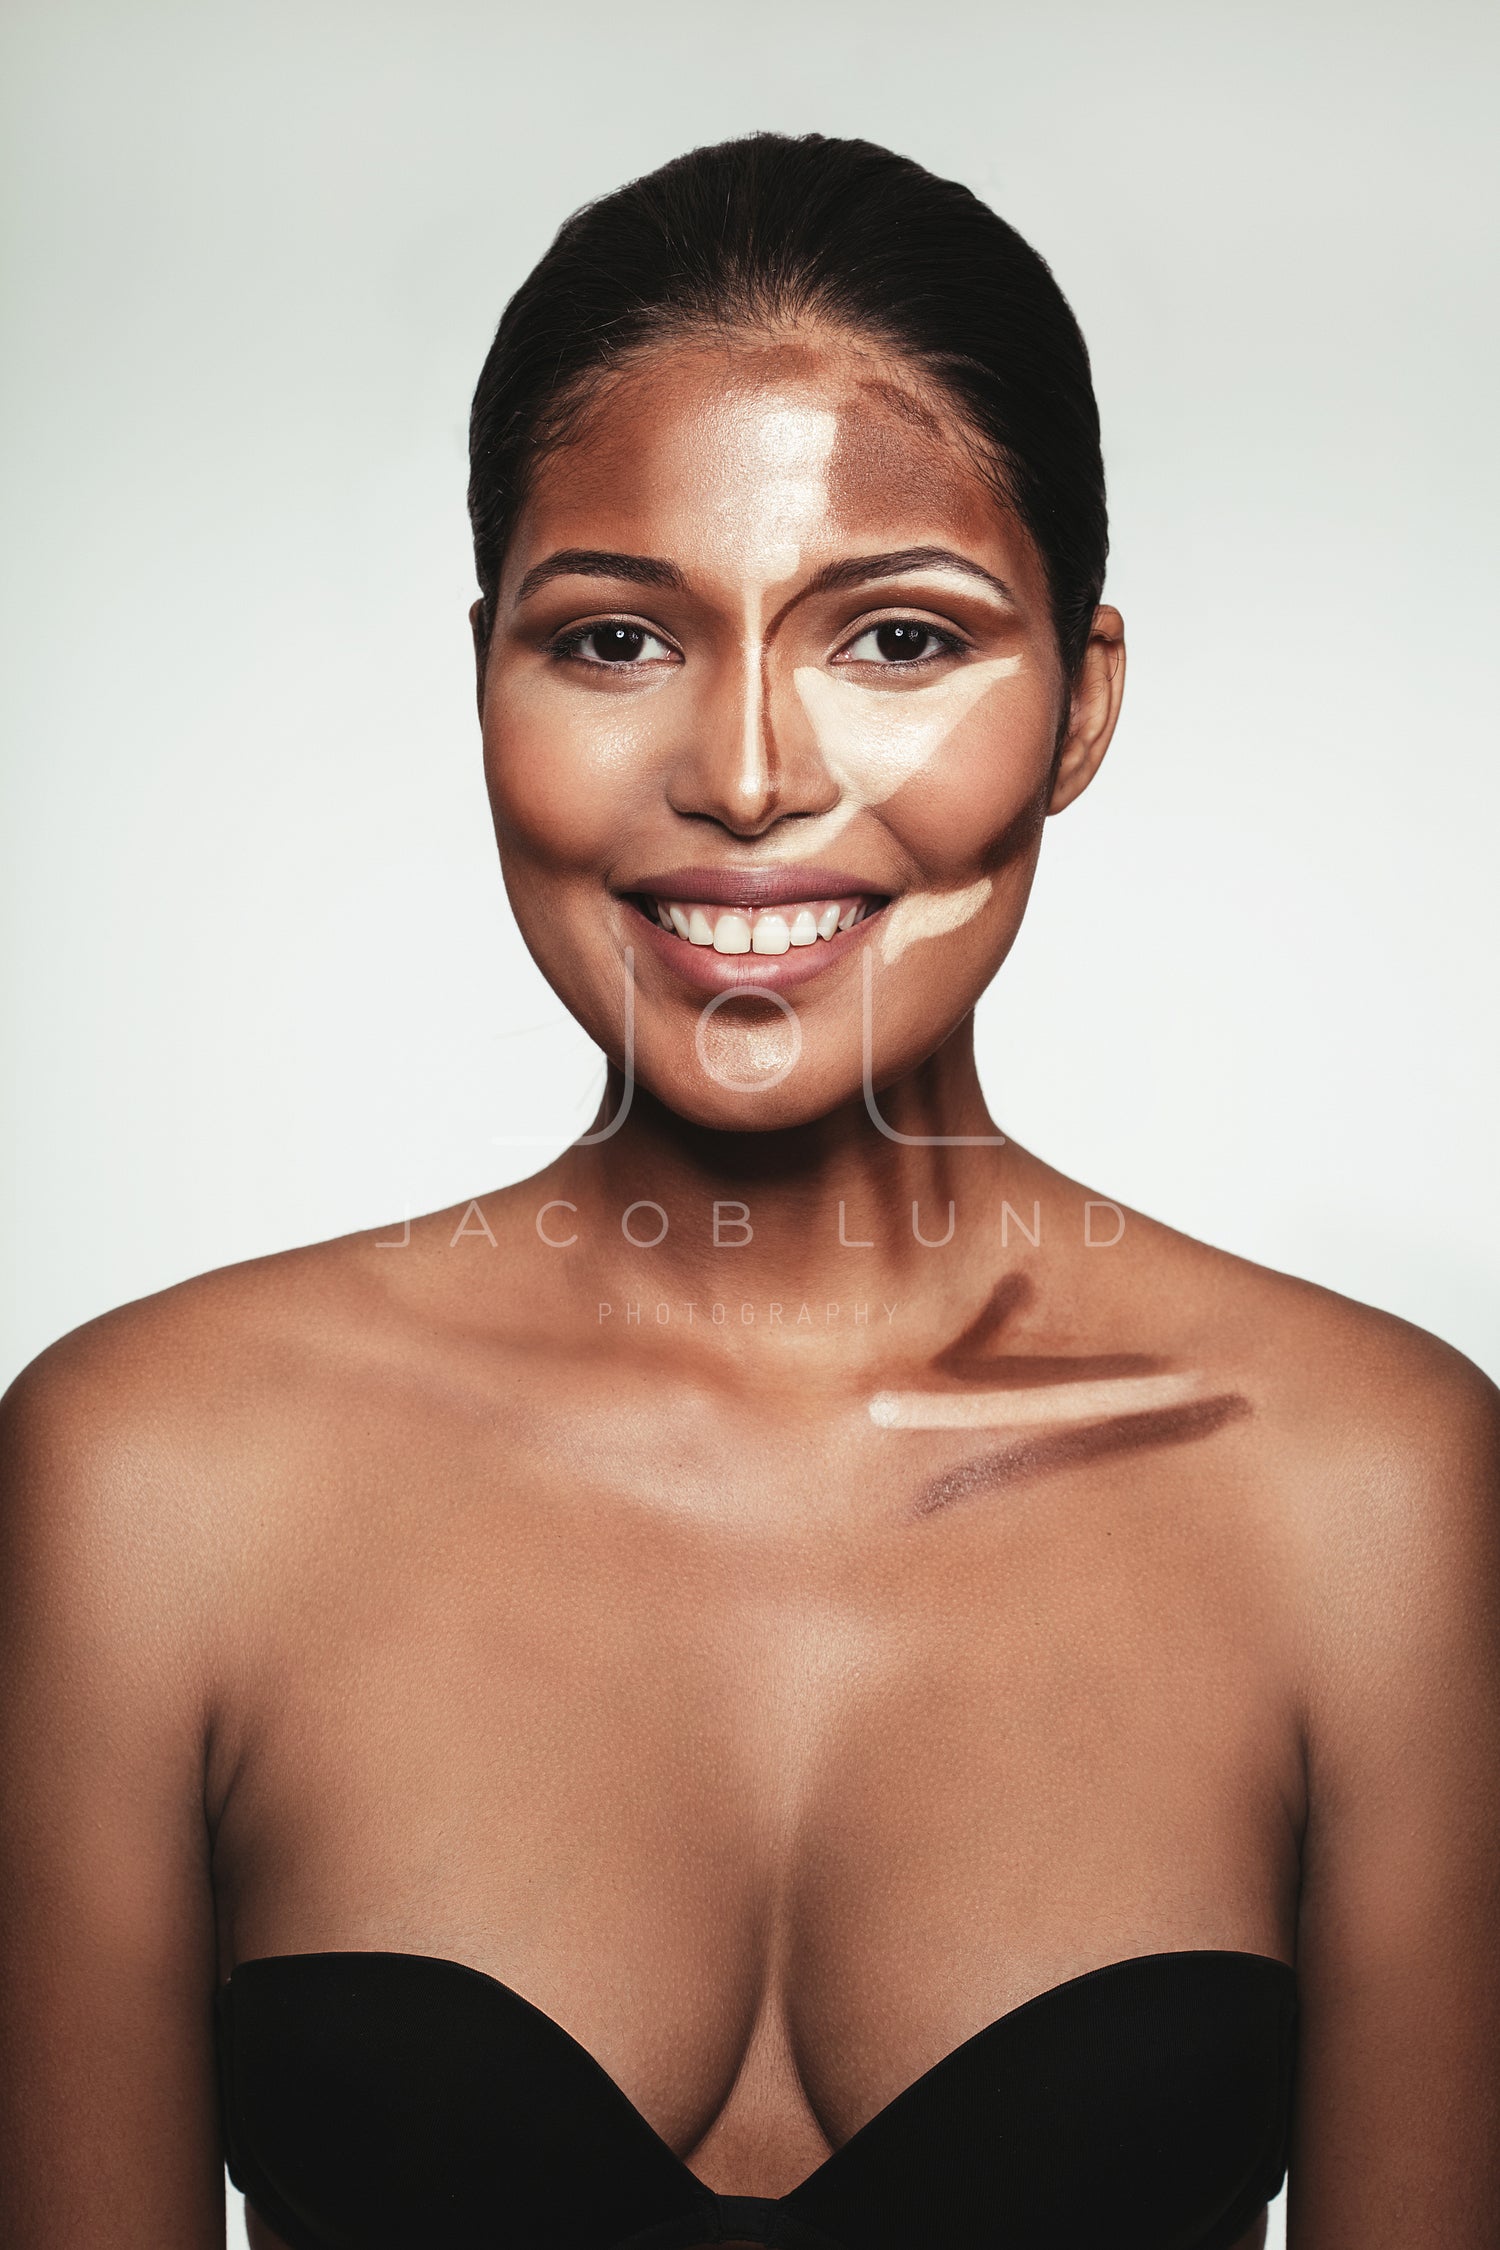 Happy woman with contour and highlight makeup – Jacob Lund